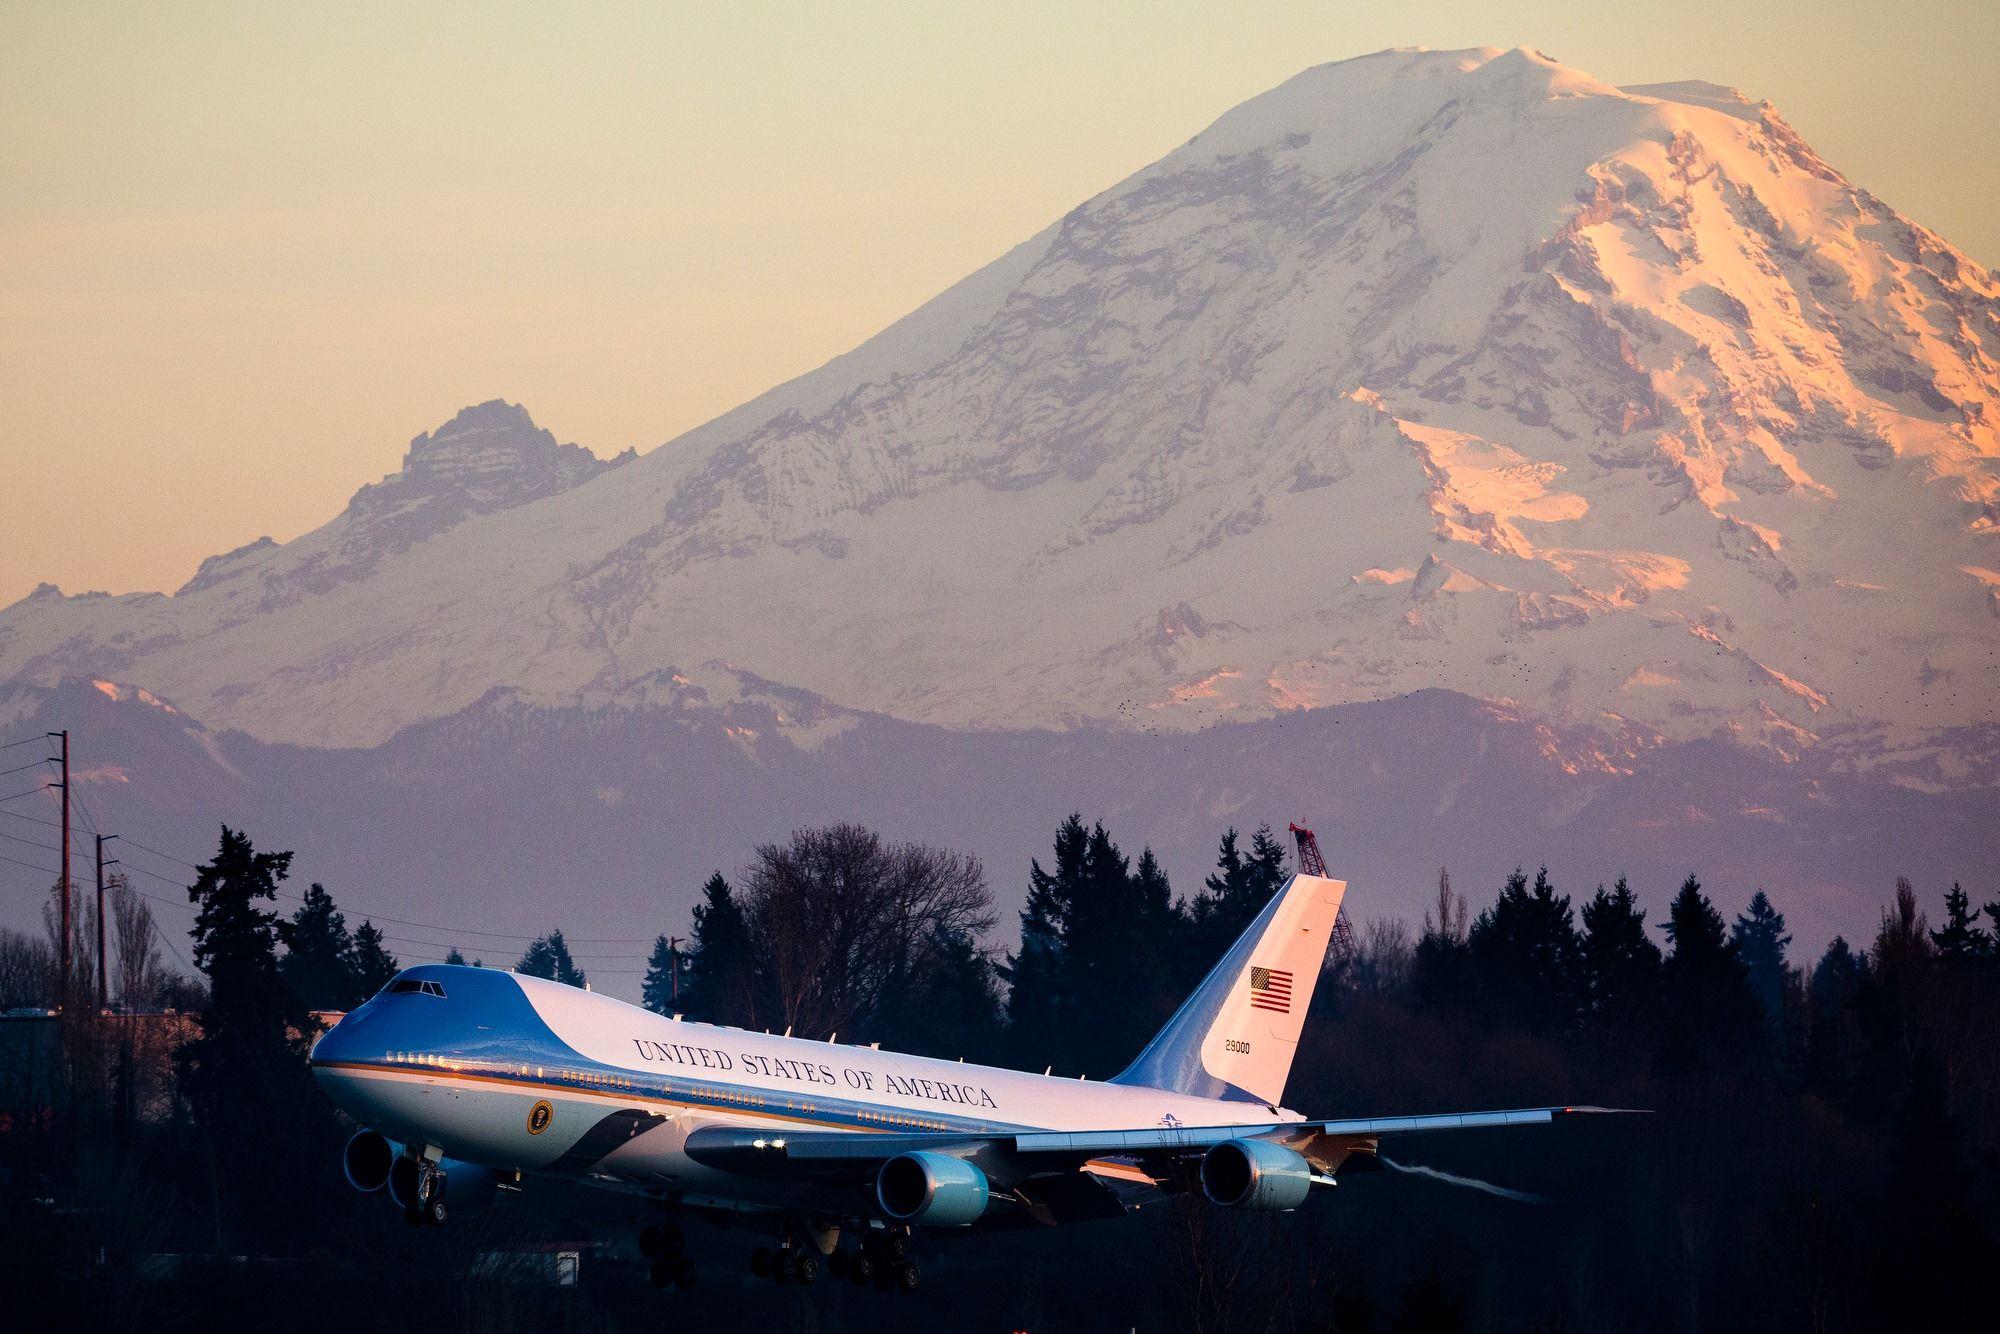 Air Force One Landing At Sea Tac With Mount Rainier In